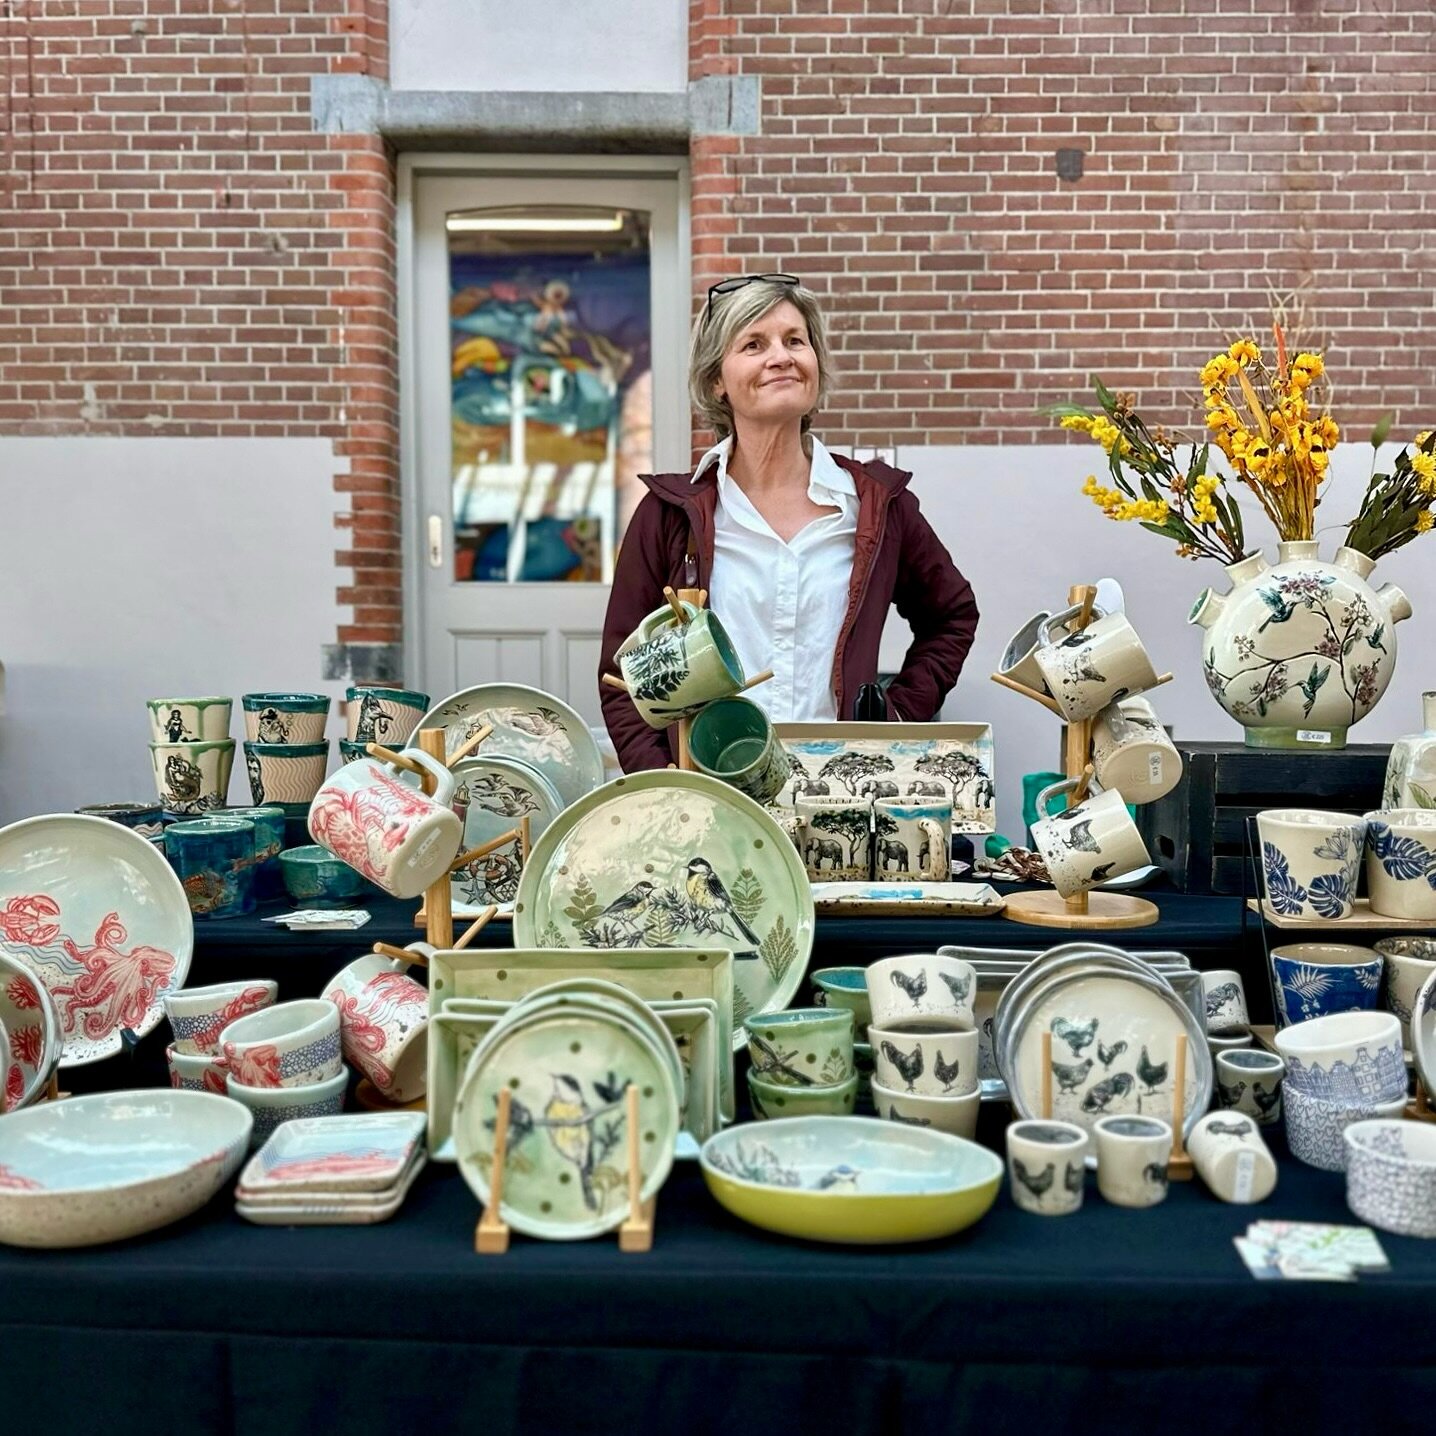 What a day! Thank you all for coming out to my 1st ever European market on Dutch soil. Loved every minute of it! I see many more opportunities :-).

In the meantime, I&rsquo;m running an Easter special in my webshop. Sign up for my collector&rsquo;s 